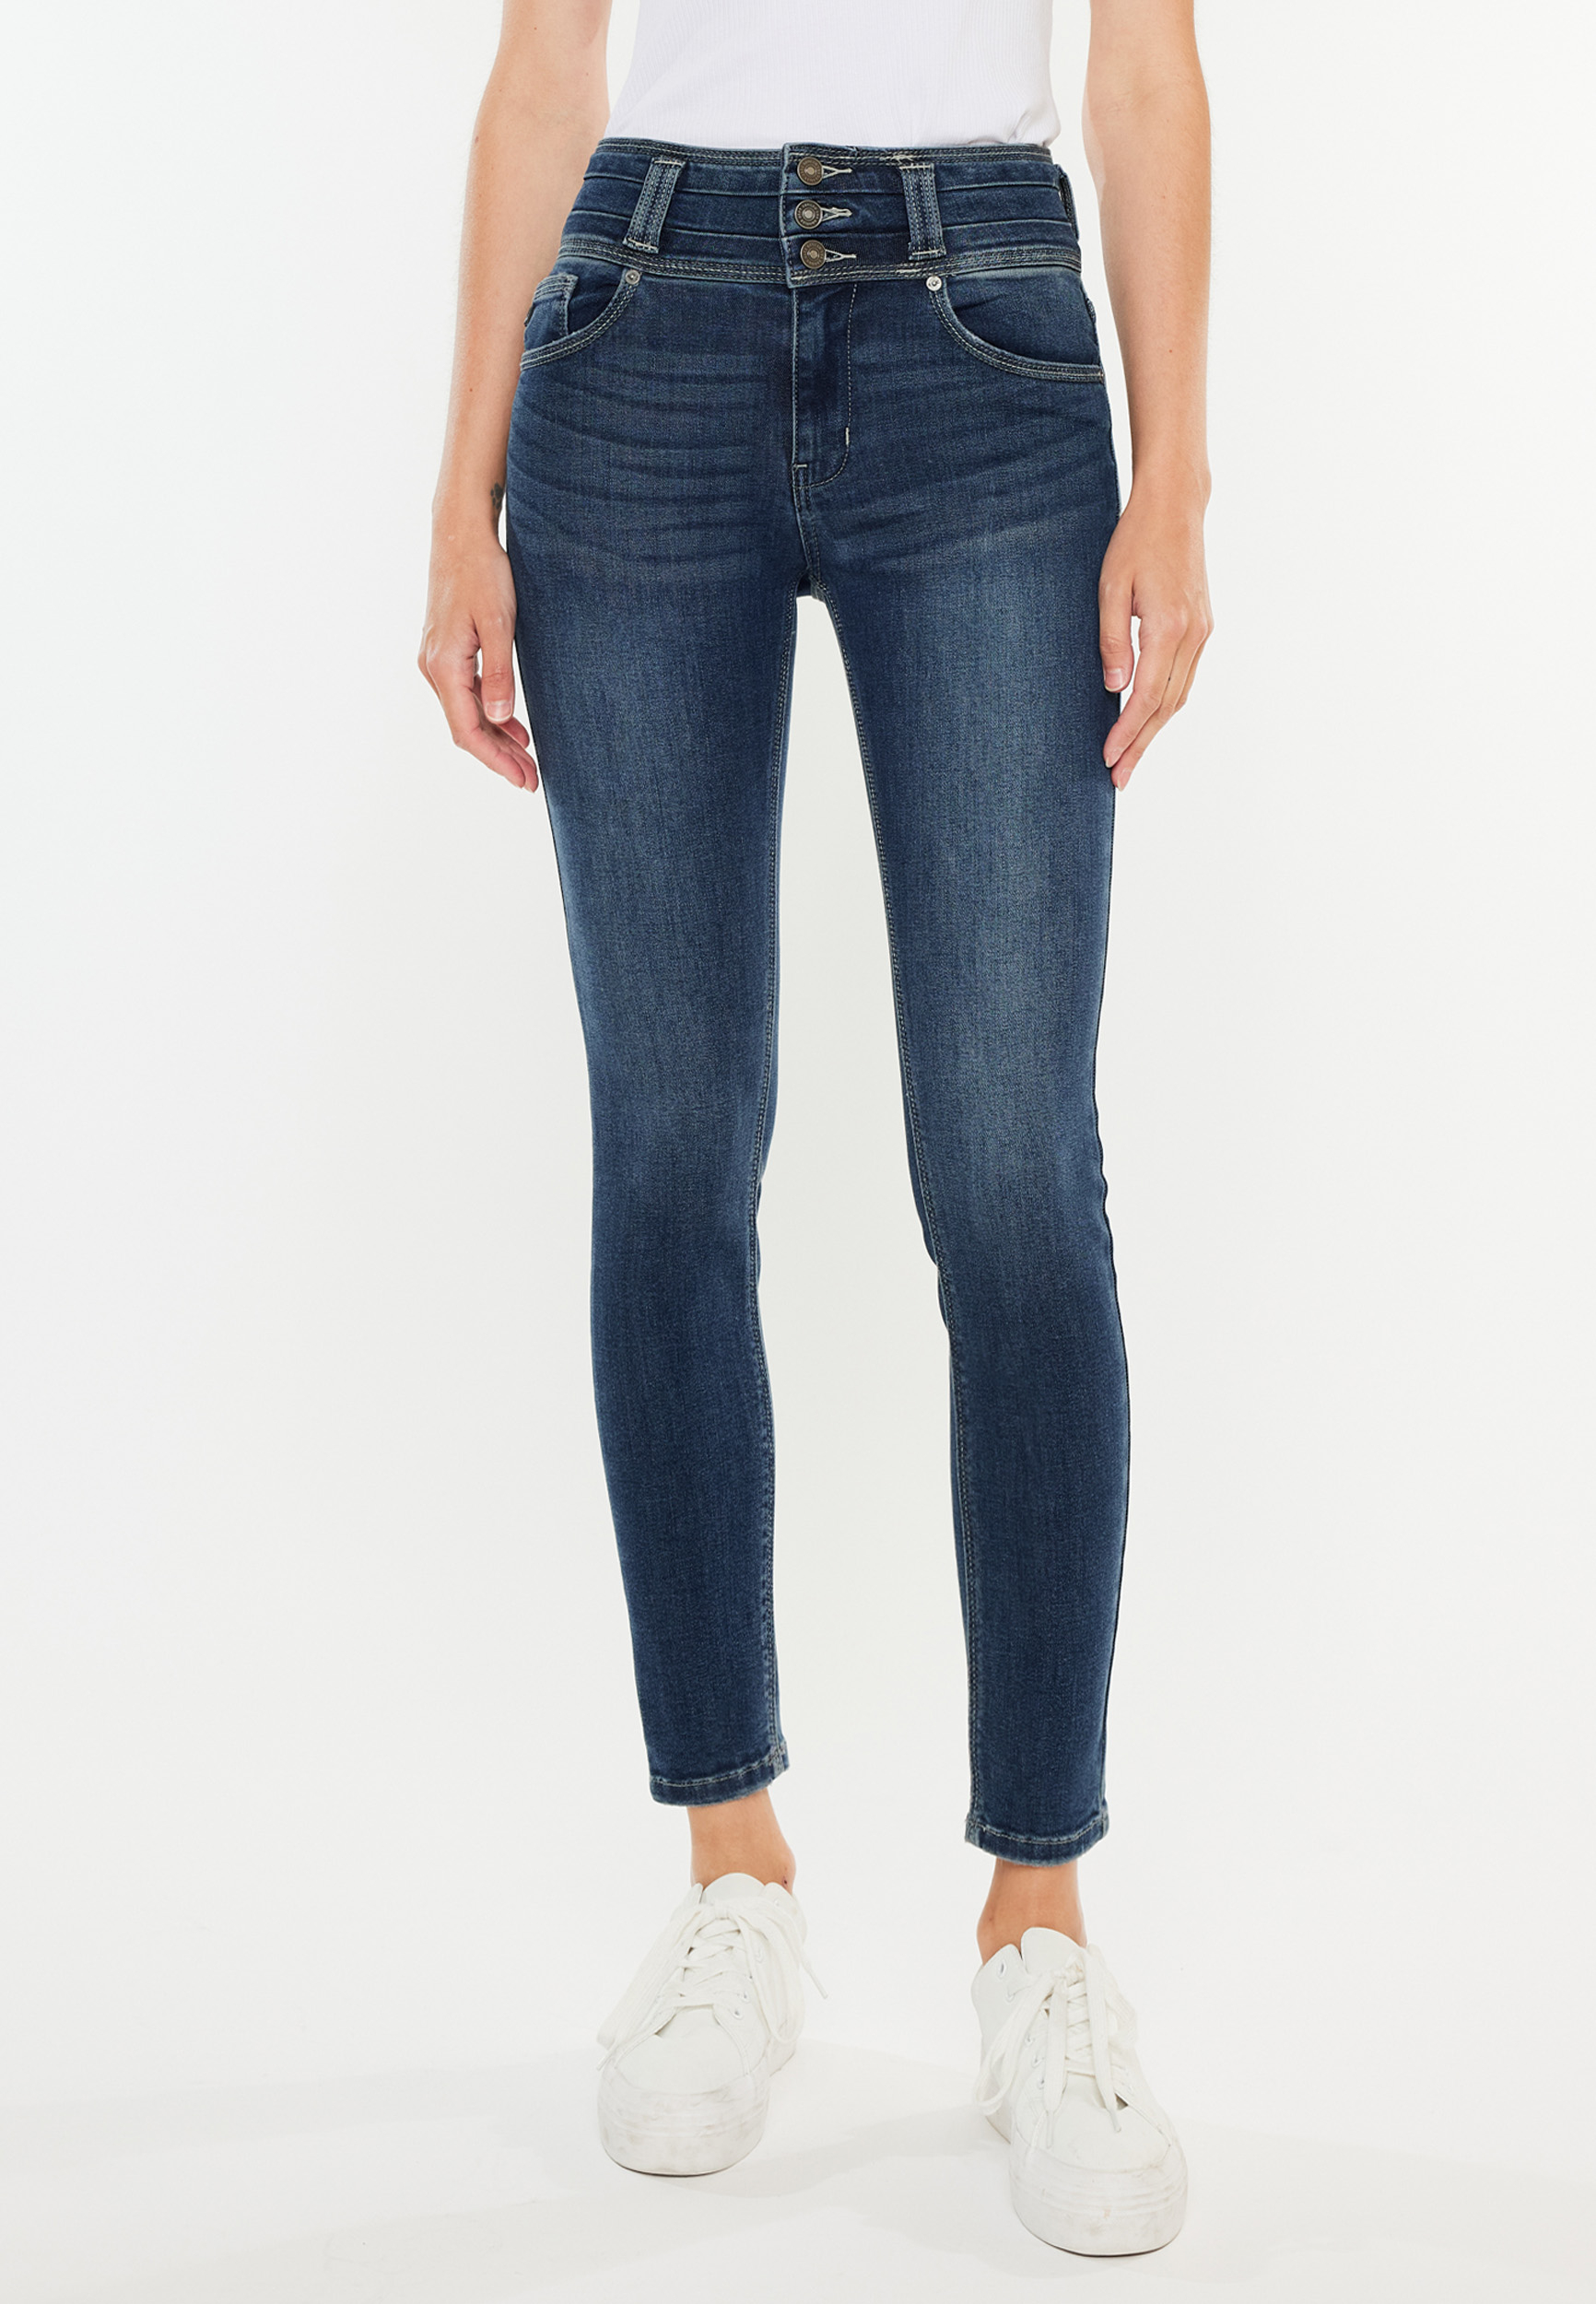 KanCan™ High Rise Stacked Waist Skinny Jean | maurices